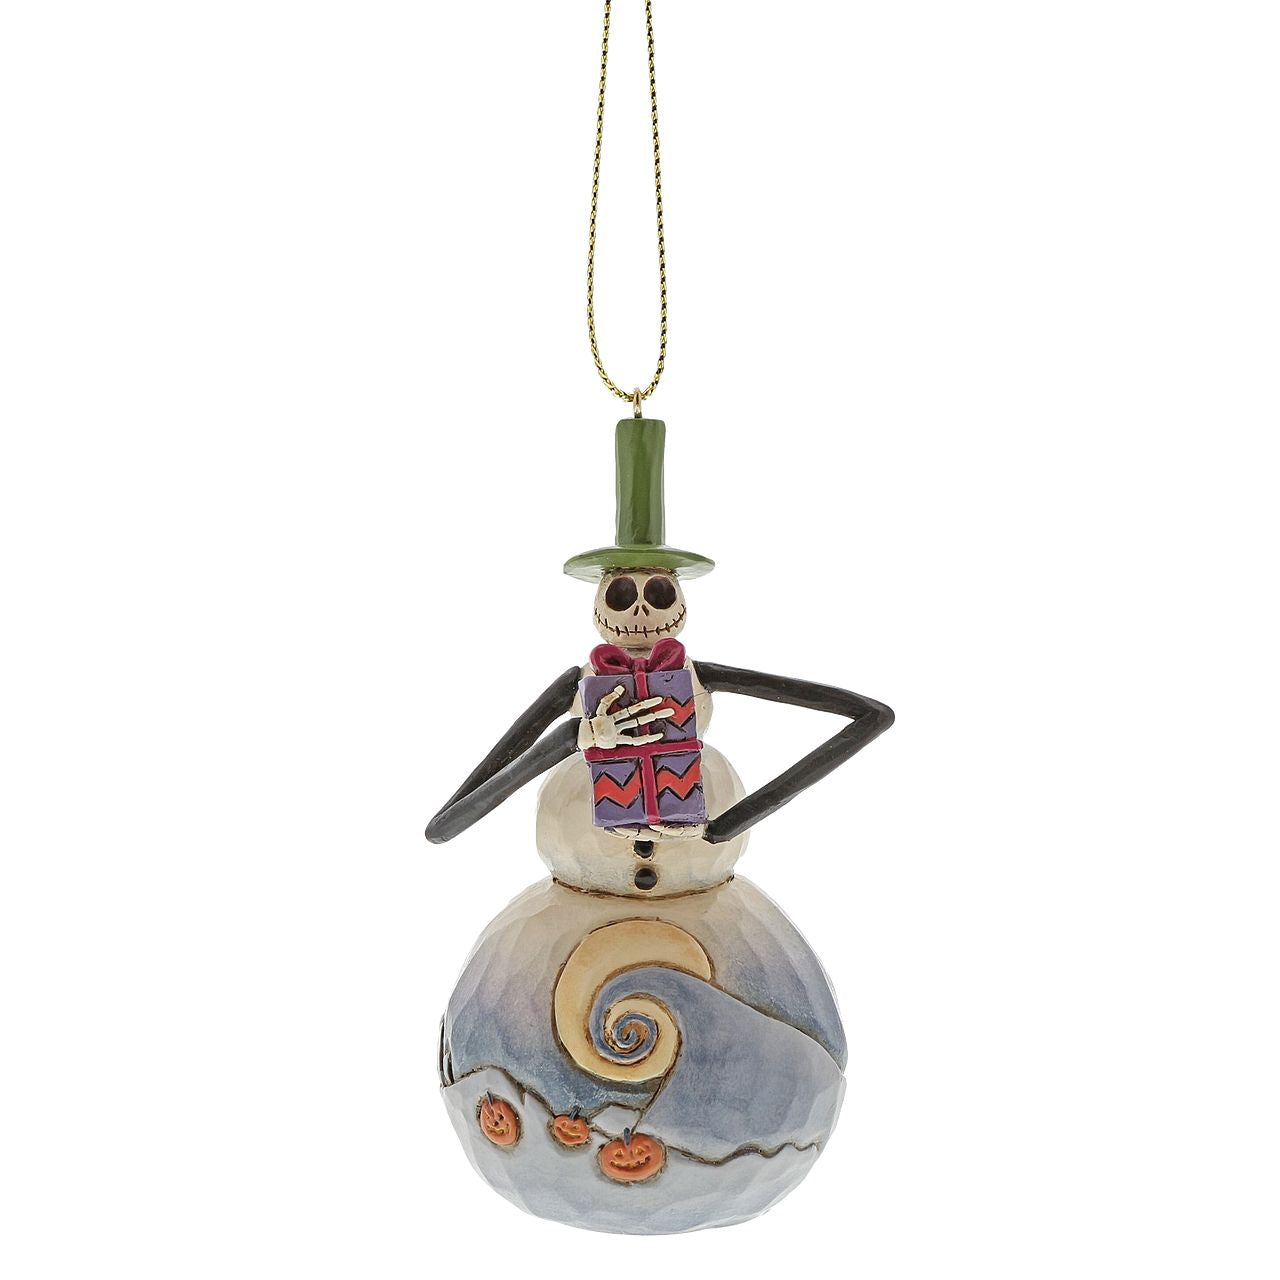 Jack Hanging Ornament Nightmare Before Christmas  Unique variations should be expected as this Nightmare Before Christmas product is hand painted. Packed in a branded gift box. Not a toy or children's product. Intended for adults only.